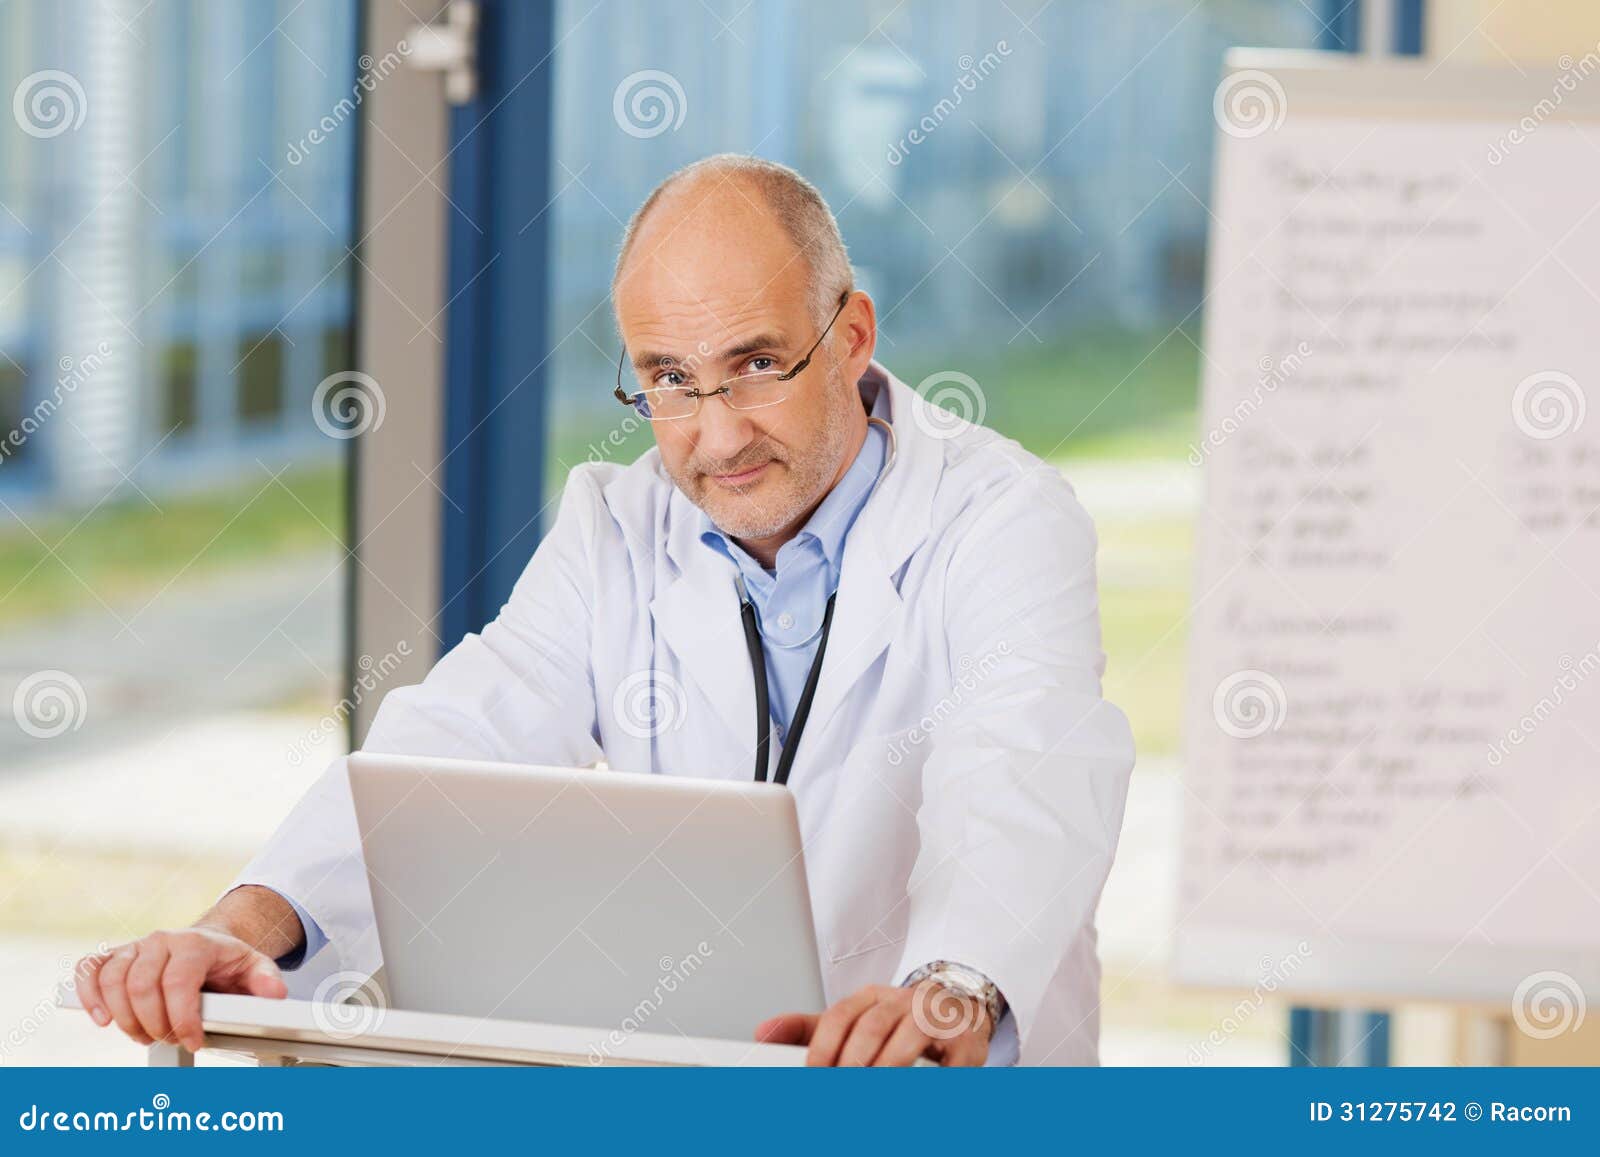 Confident Mature Doctor with Laptop at Podium Stock Photo - Image of ...